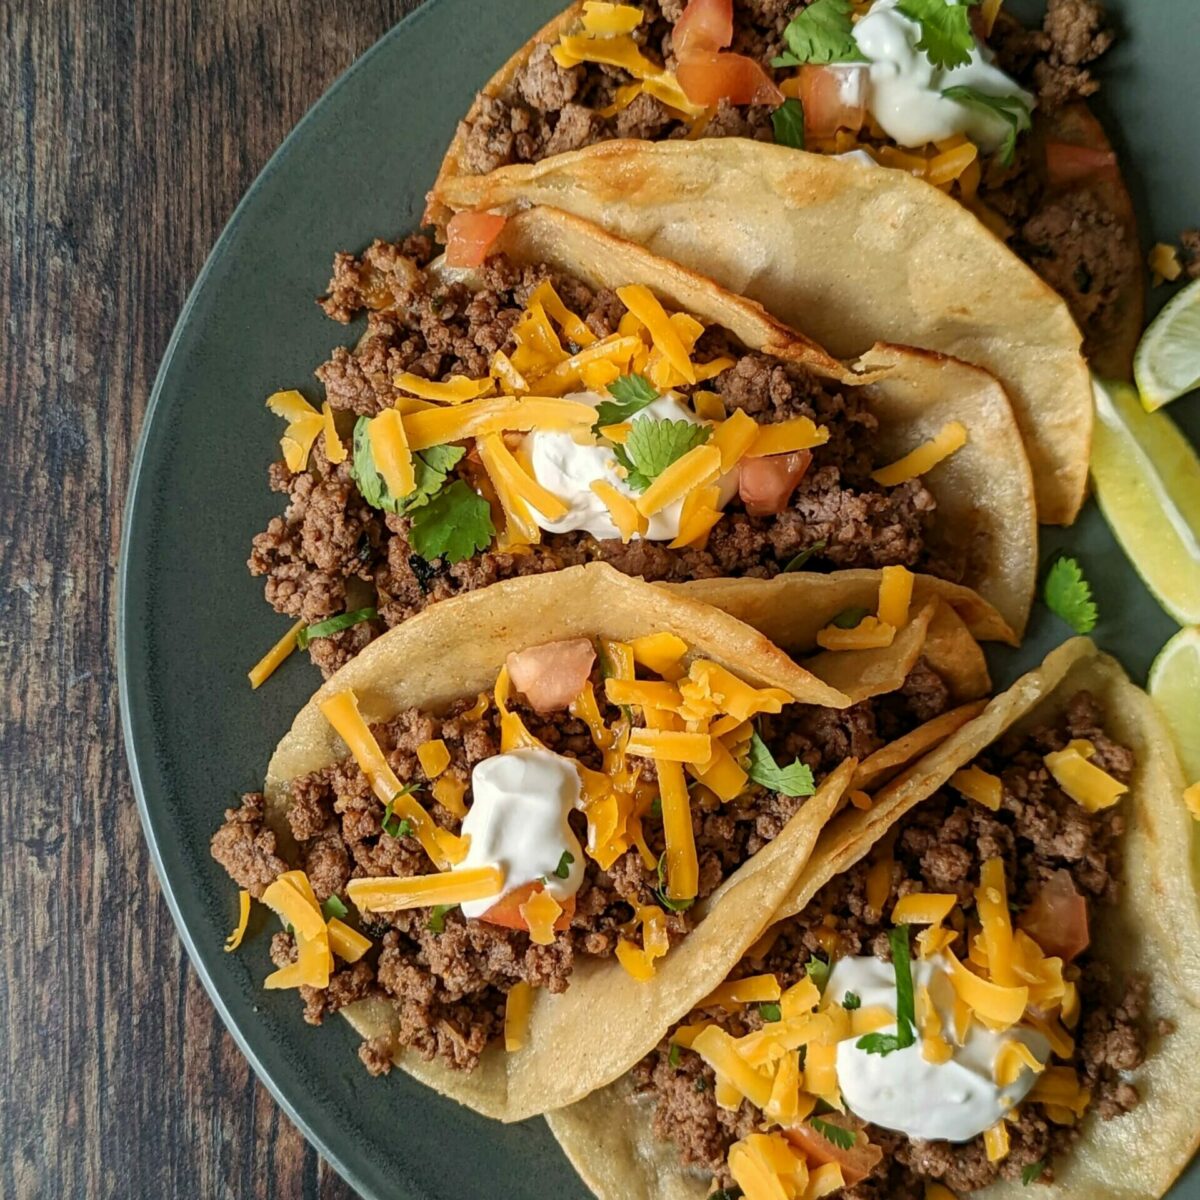 Four ground beef tacos topped with sour cream, cheddar cheese, and cilantro.